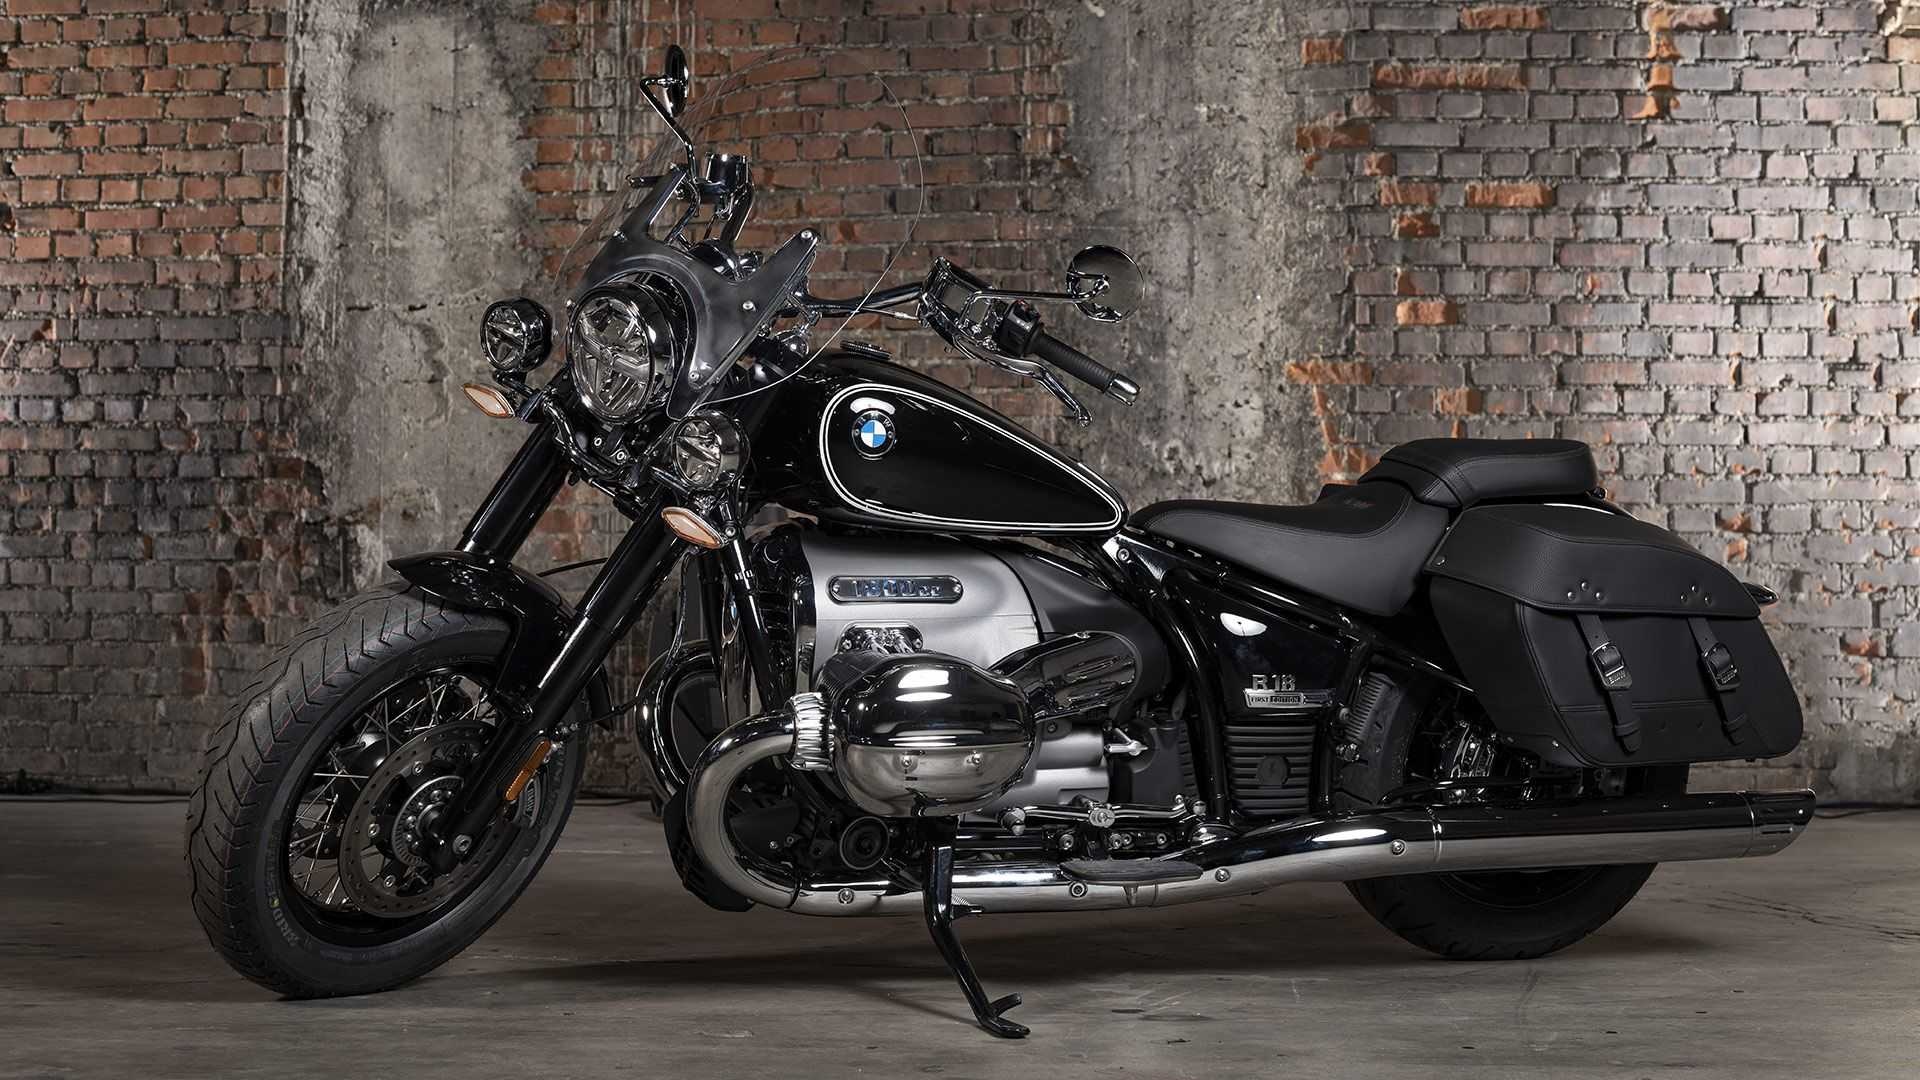 BMW R18 Classic, Classic cruiser, Refined luxury, Motorcycle perfection, 1920x1080 Full HD Desktop